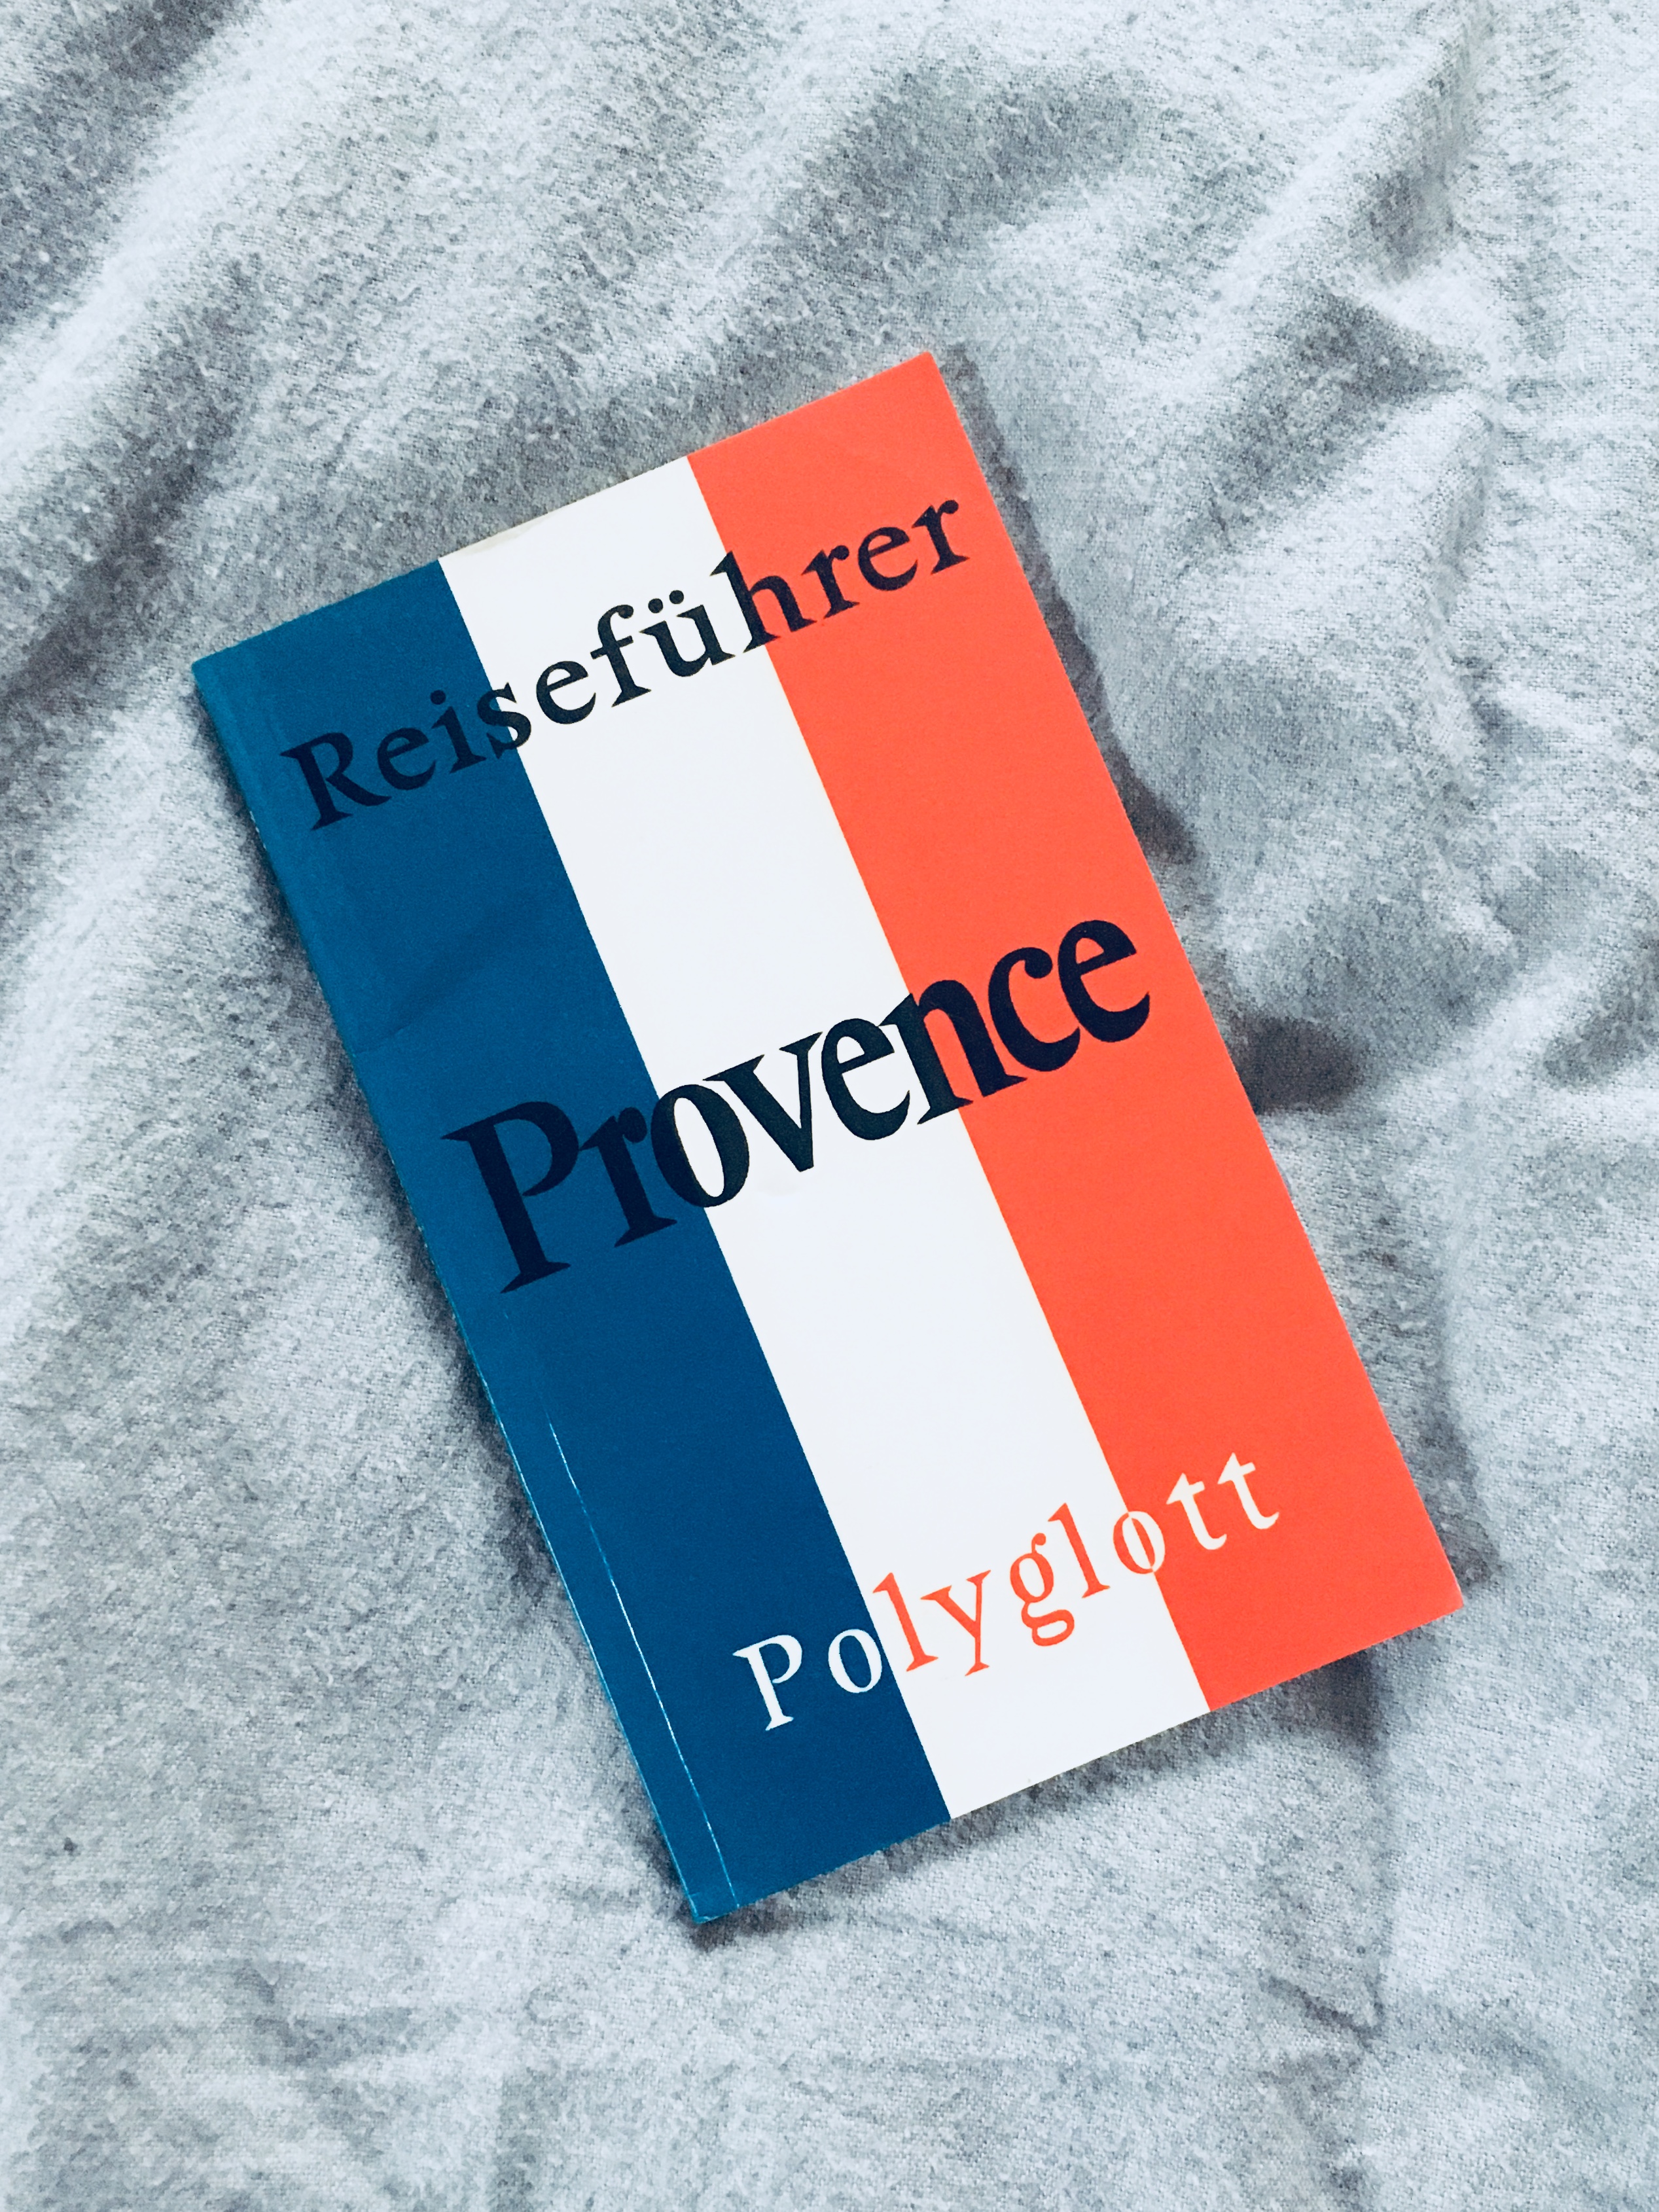 book design back in the days Provence Polyglott